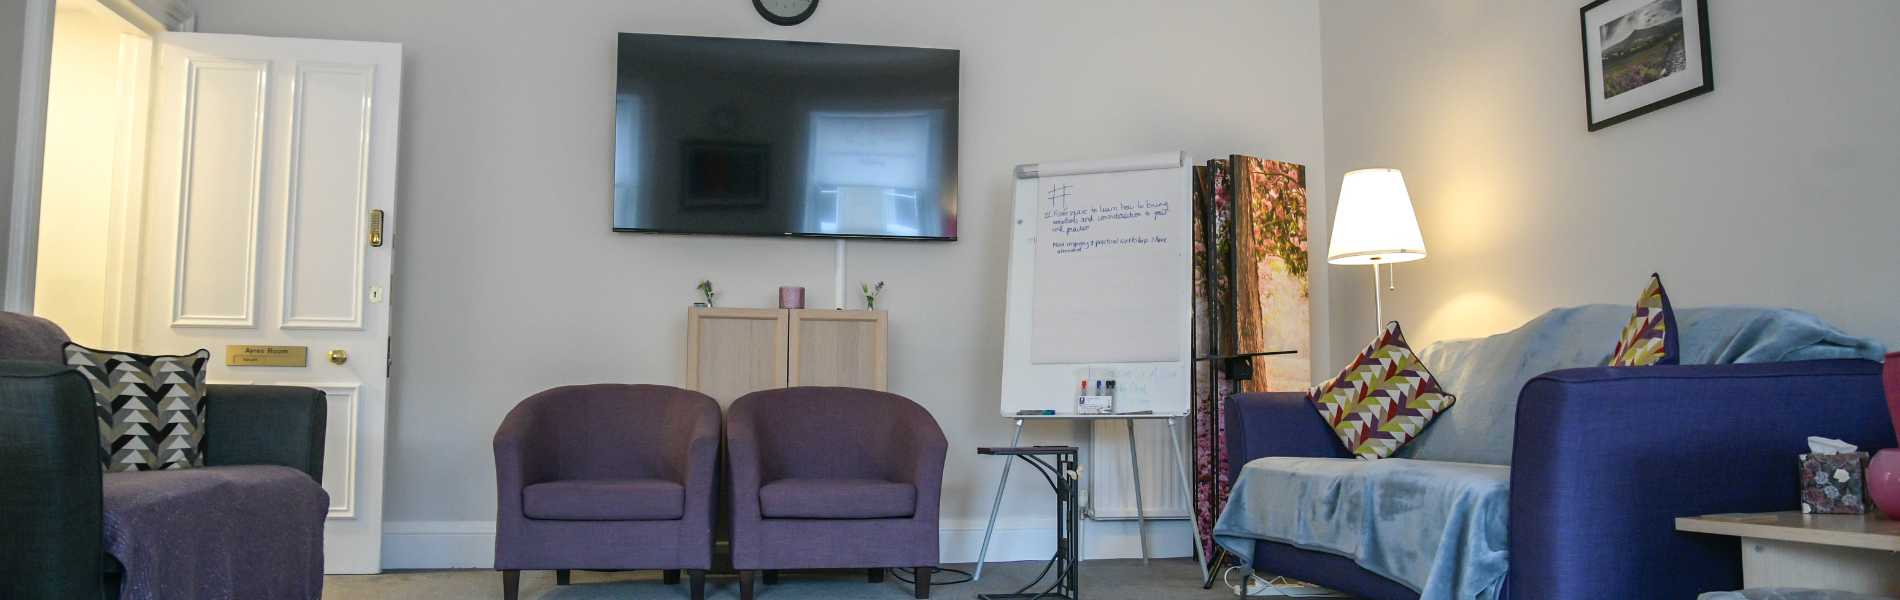 Physis Scotland Therapy and Meeting Rooms for Rental